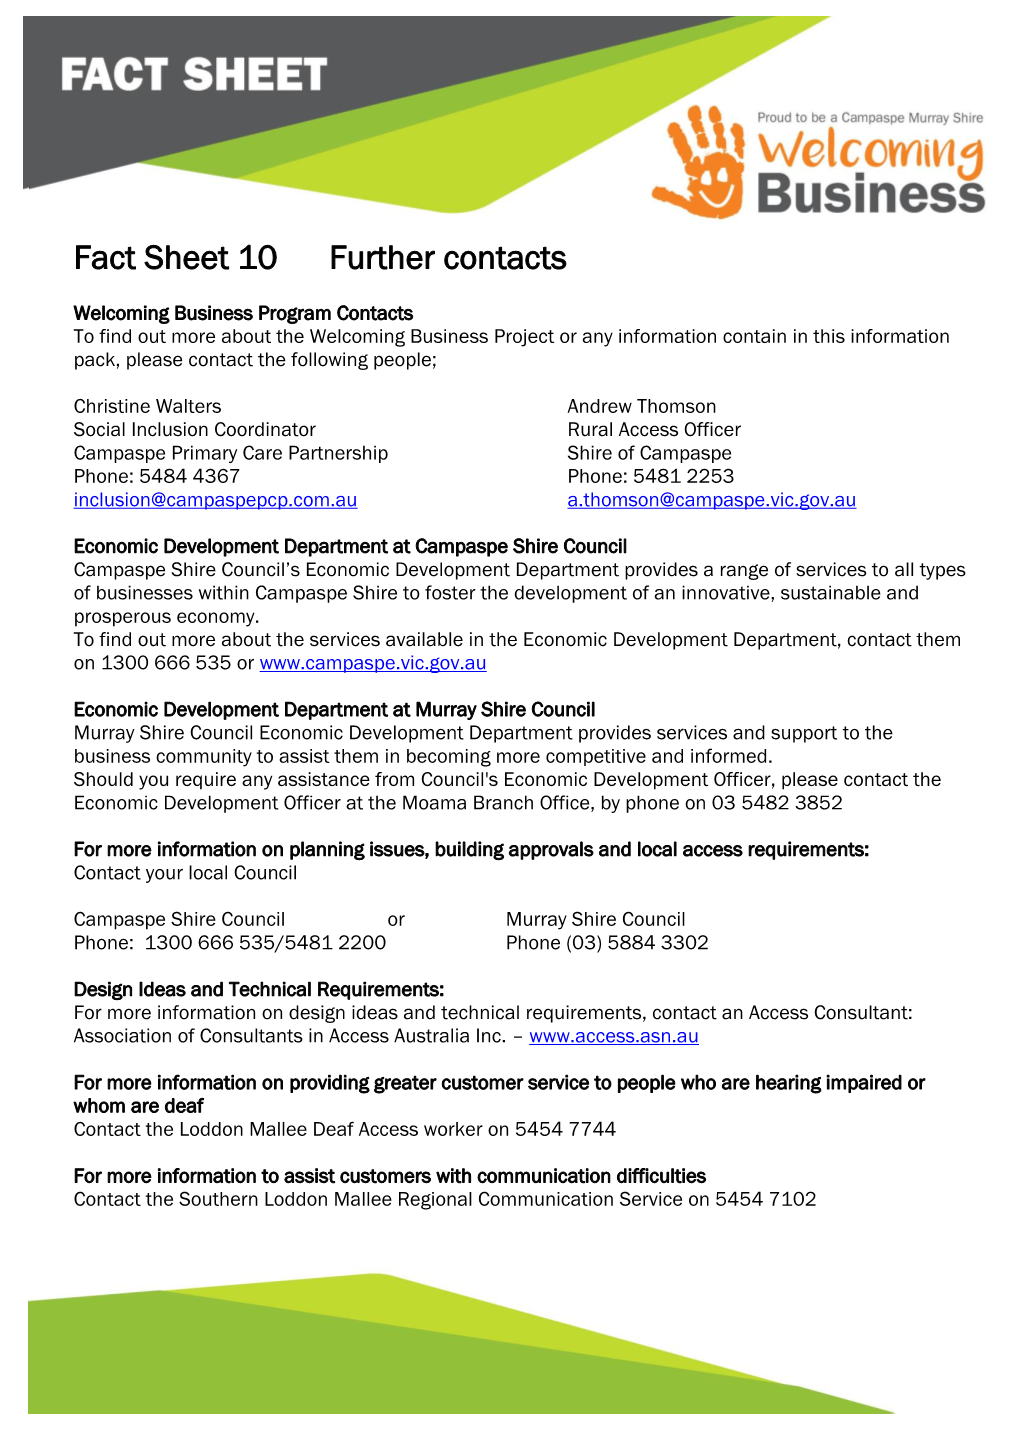 Fact Sheet 10 Further Contacts